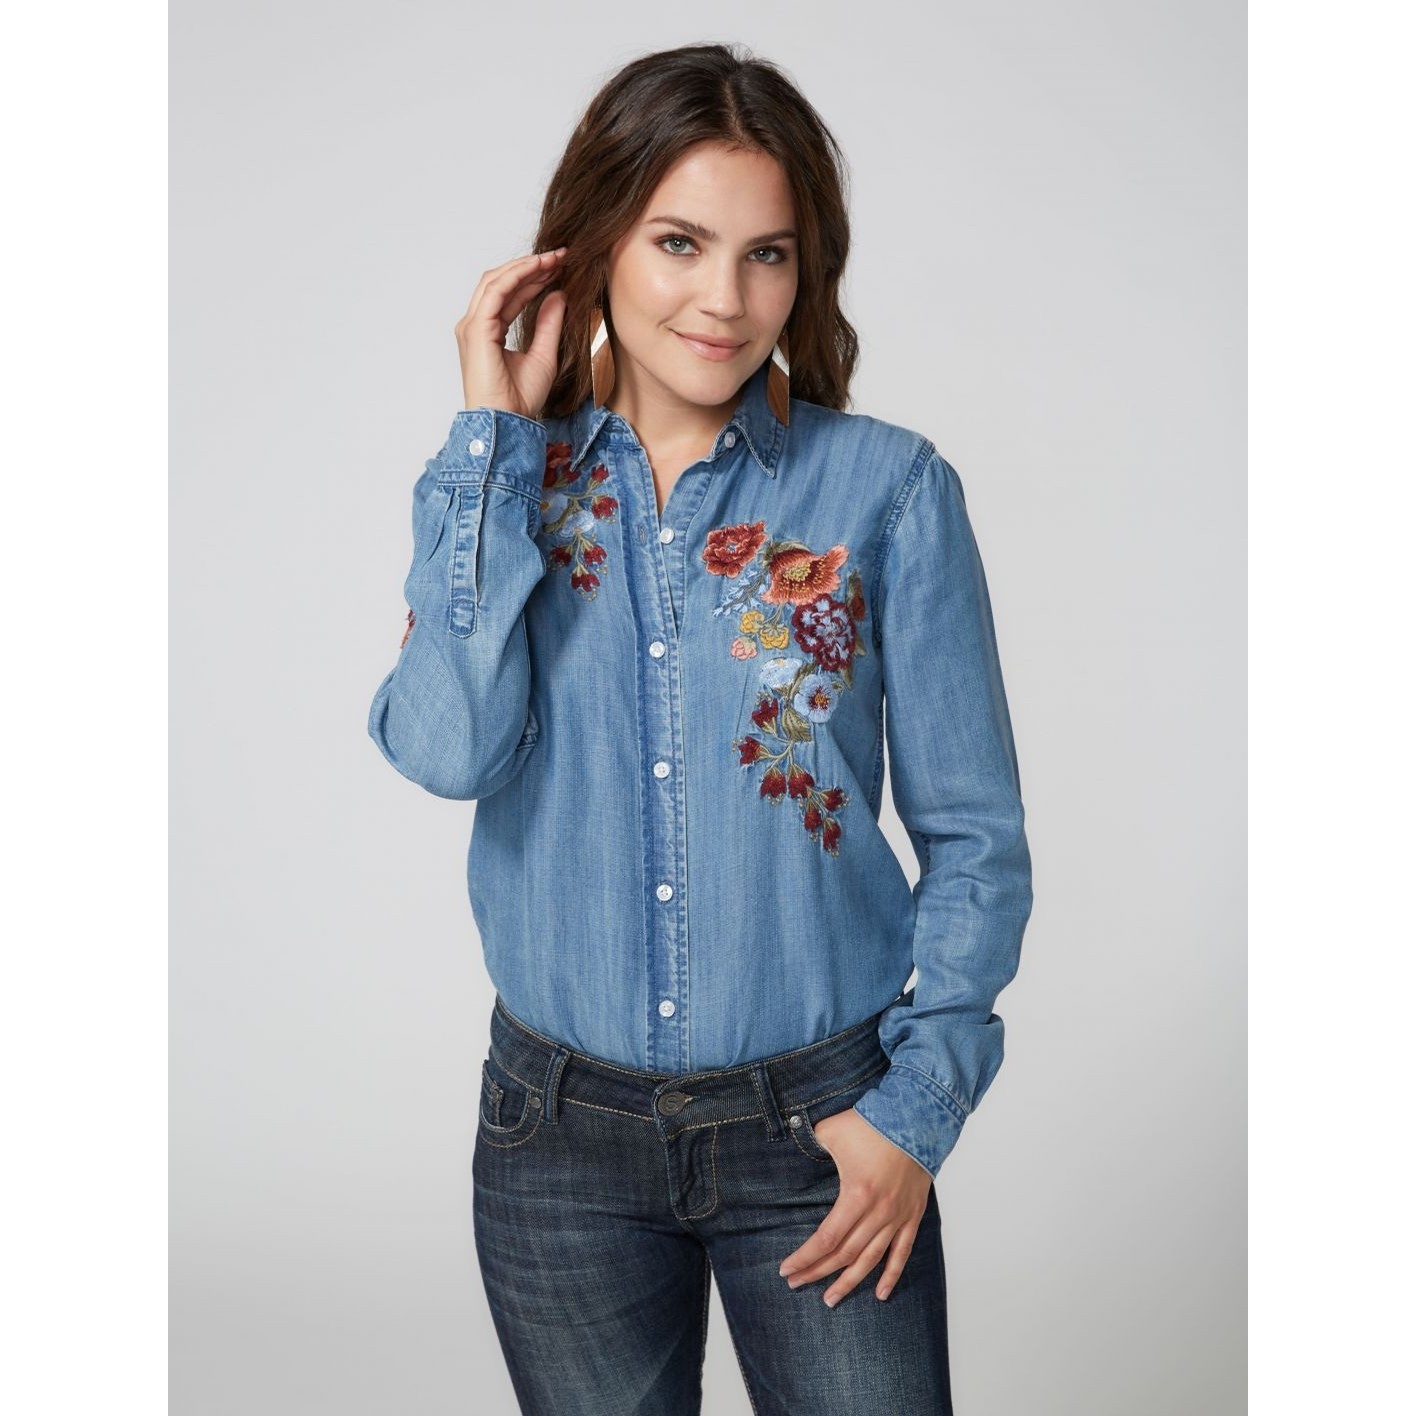 Stetson Women's Tencel Flower Denim Shirt Cowgirl Clothing at Cry Baby ...